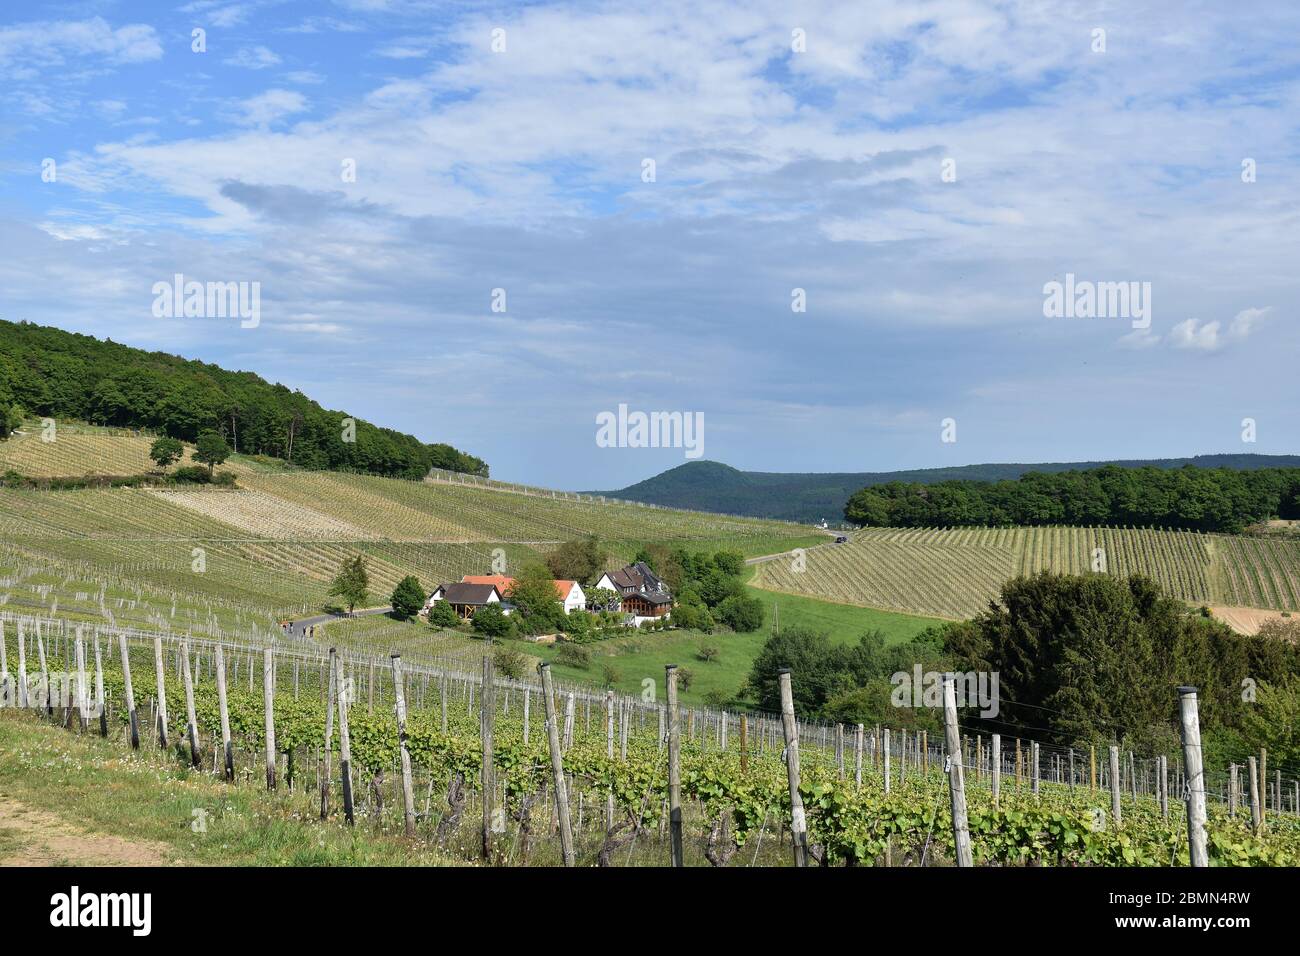 Scenic rural landscape with vineyards in the Ahr valley, Germany Stock Photo